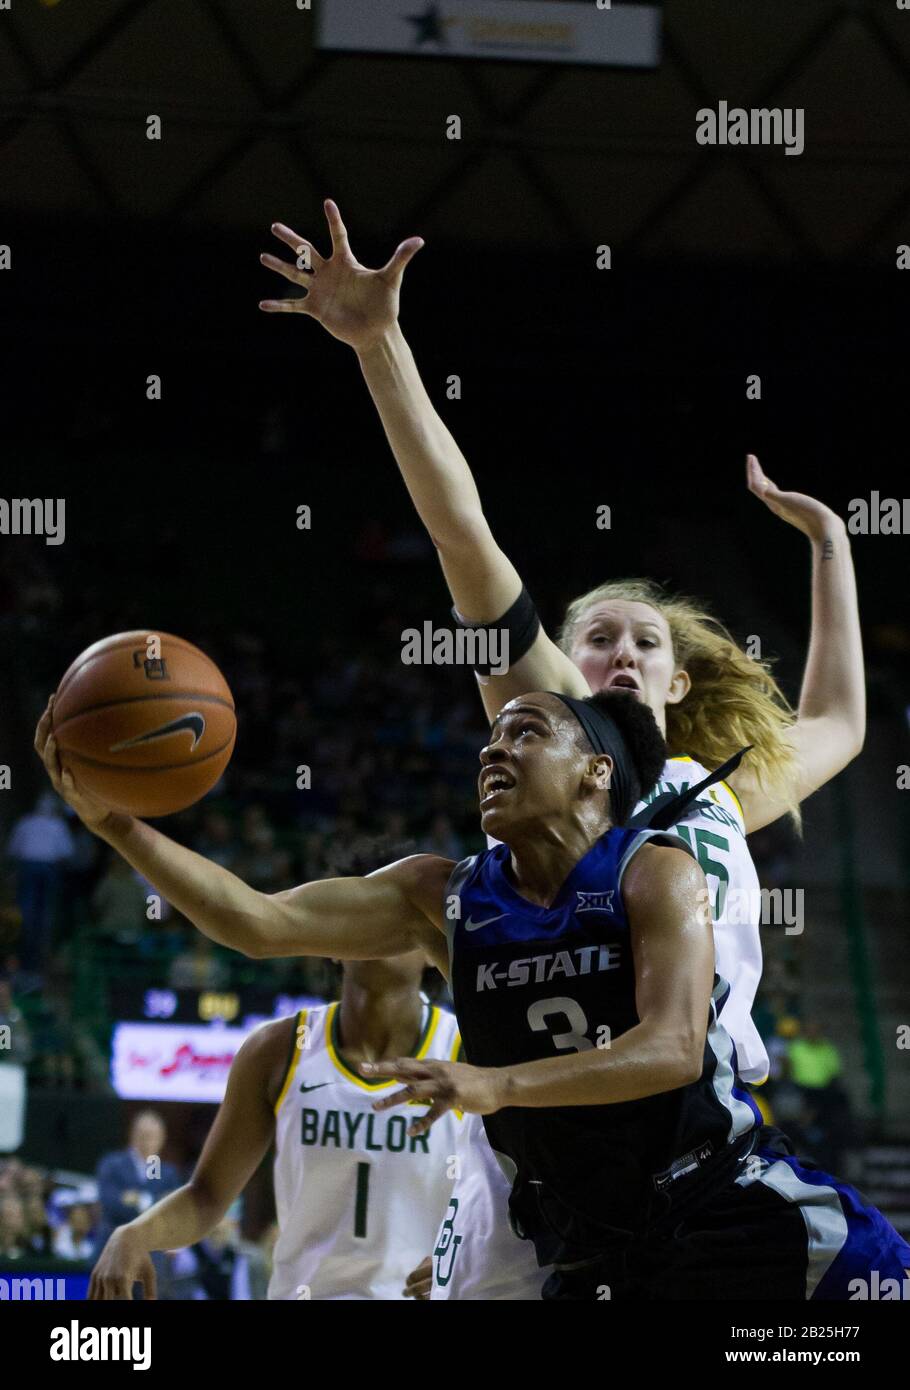 Waco, Texas, USA. 29th Feb, 2020. Kansas State Wildcats guard Angela Harris (3) attempts a shot against Baylor Lady Bears forward Lauren Cox (15) during the 1st half of the NCAA Women's Basketball game between Kansas State and the Baylor Lady Bears at The Ferrell Center in Waco, Texas. Matthew Lynch/CSM/Alamy Live News Stock Photo